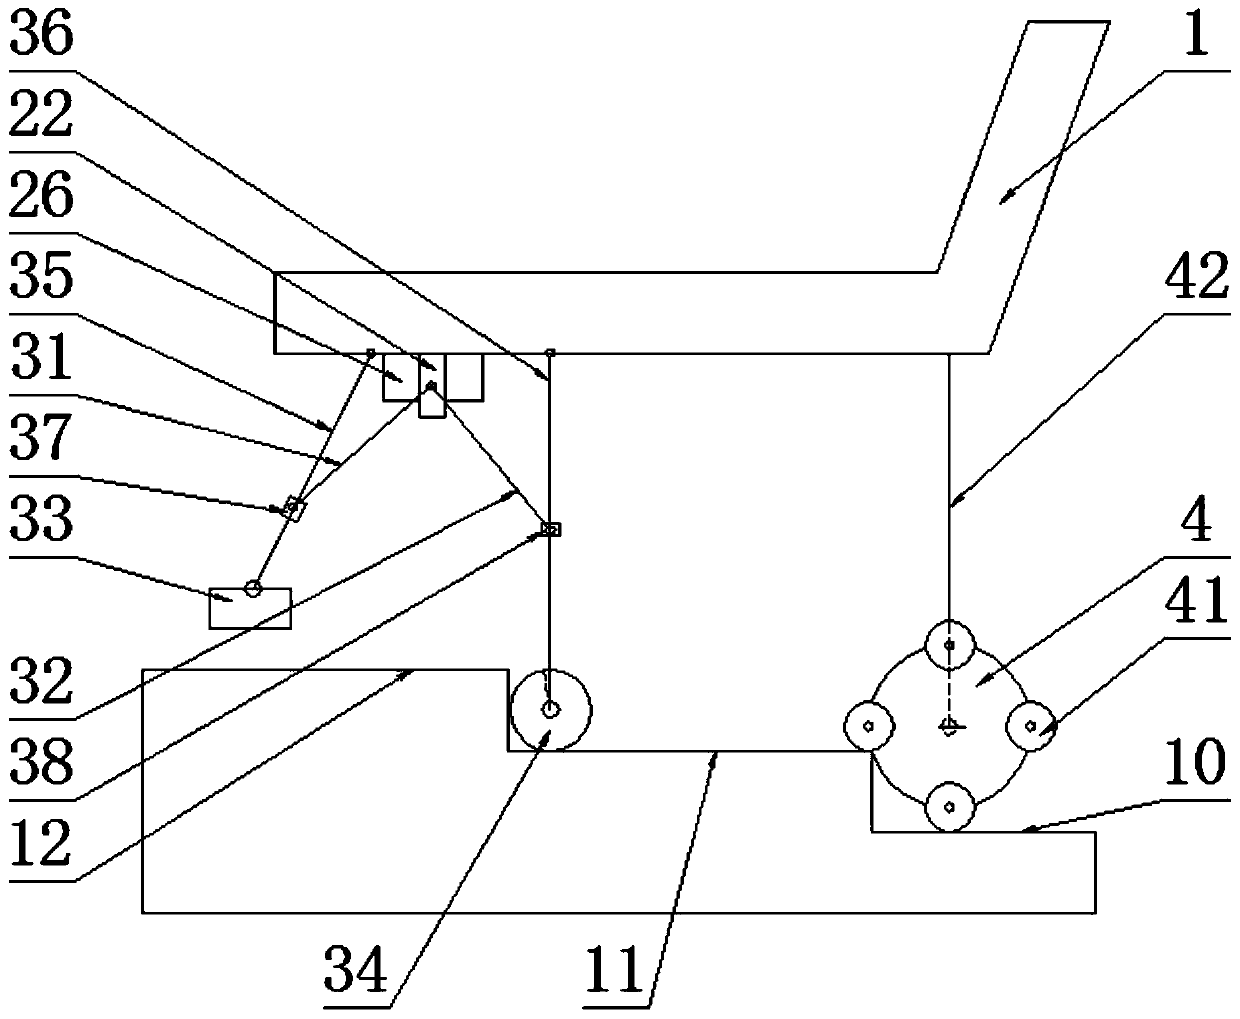 A connecting rod type stair climbing wheelchair